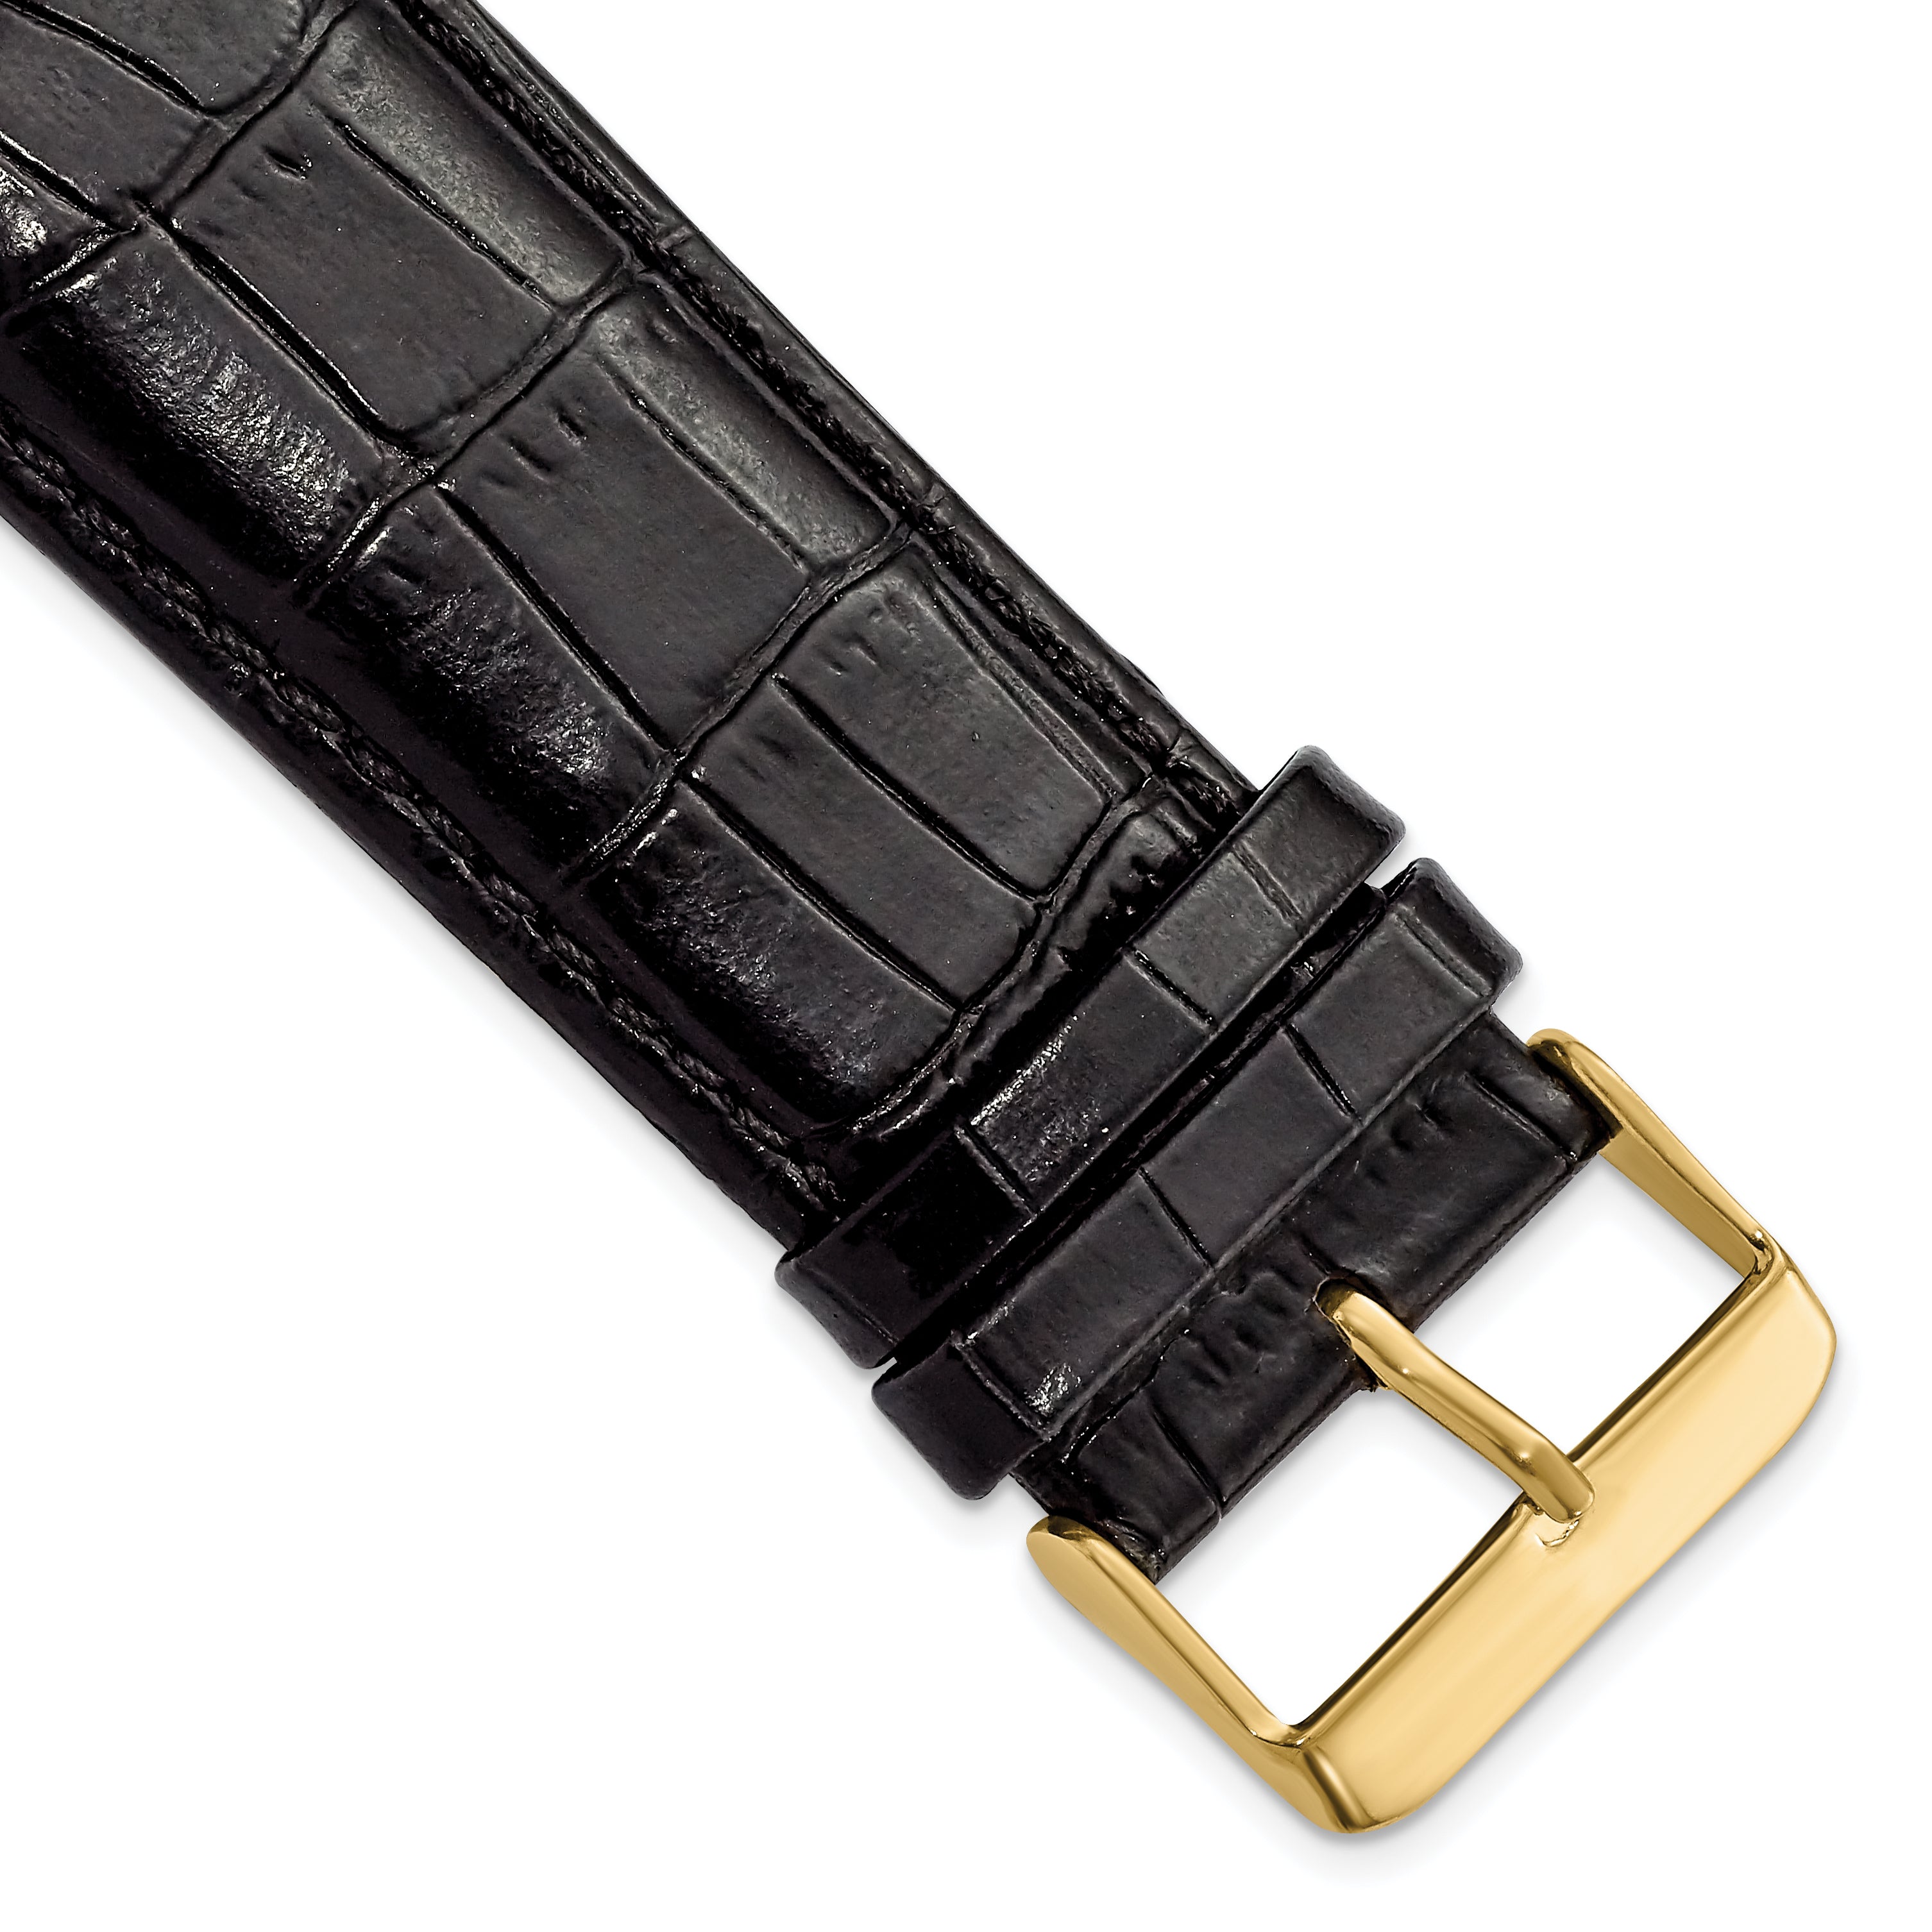 DeBeer 26mm Black Crocodile Grain Chronograph Leather with Gold-tone Buckle 7.5 inch Watch Band